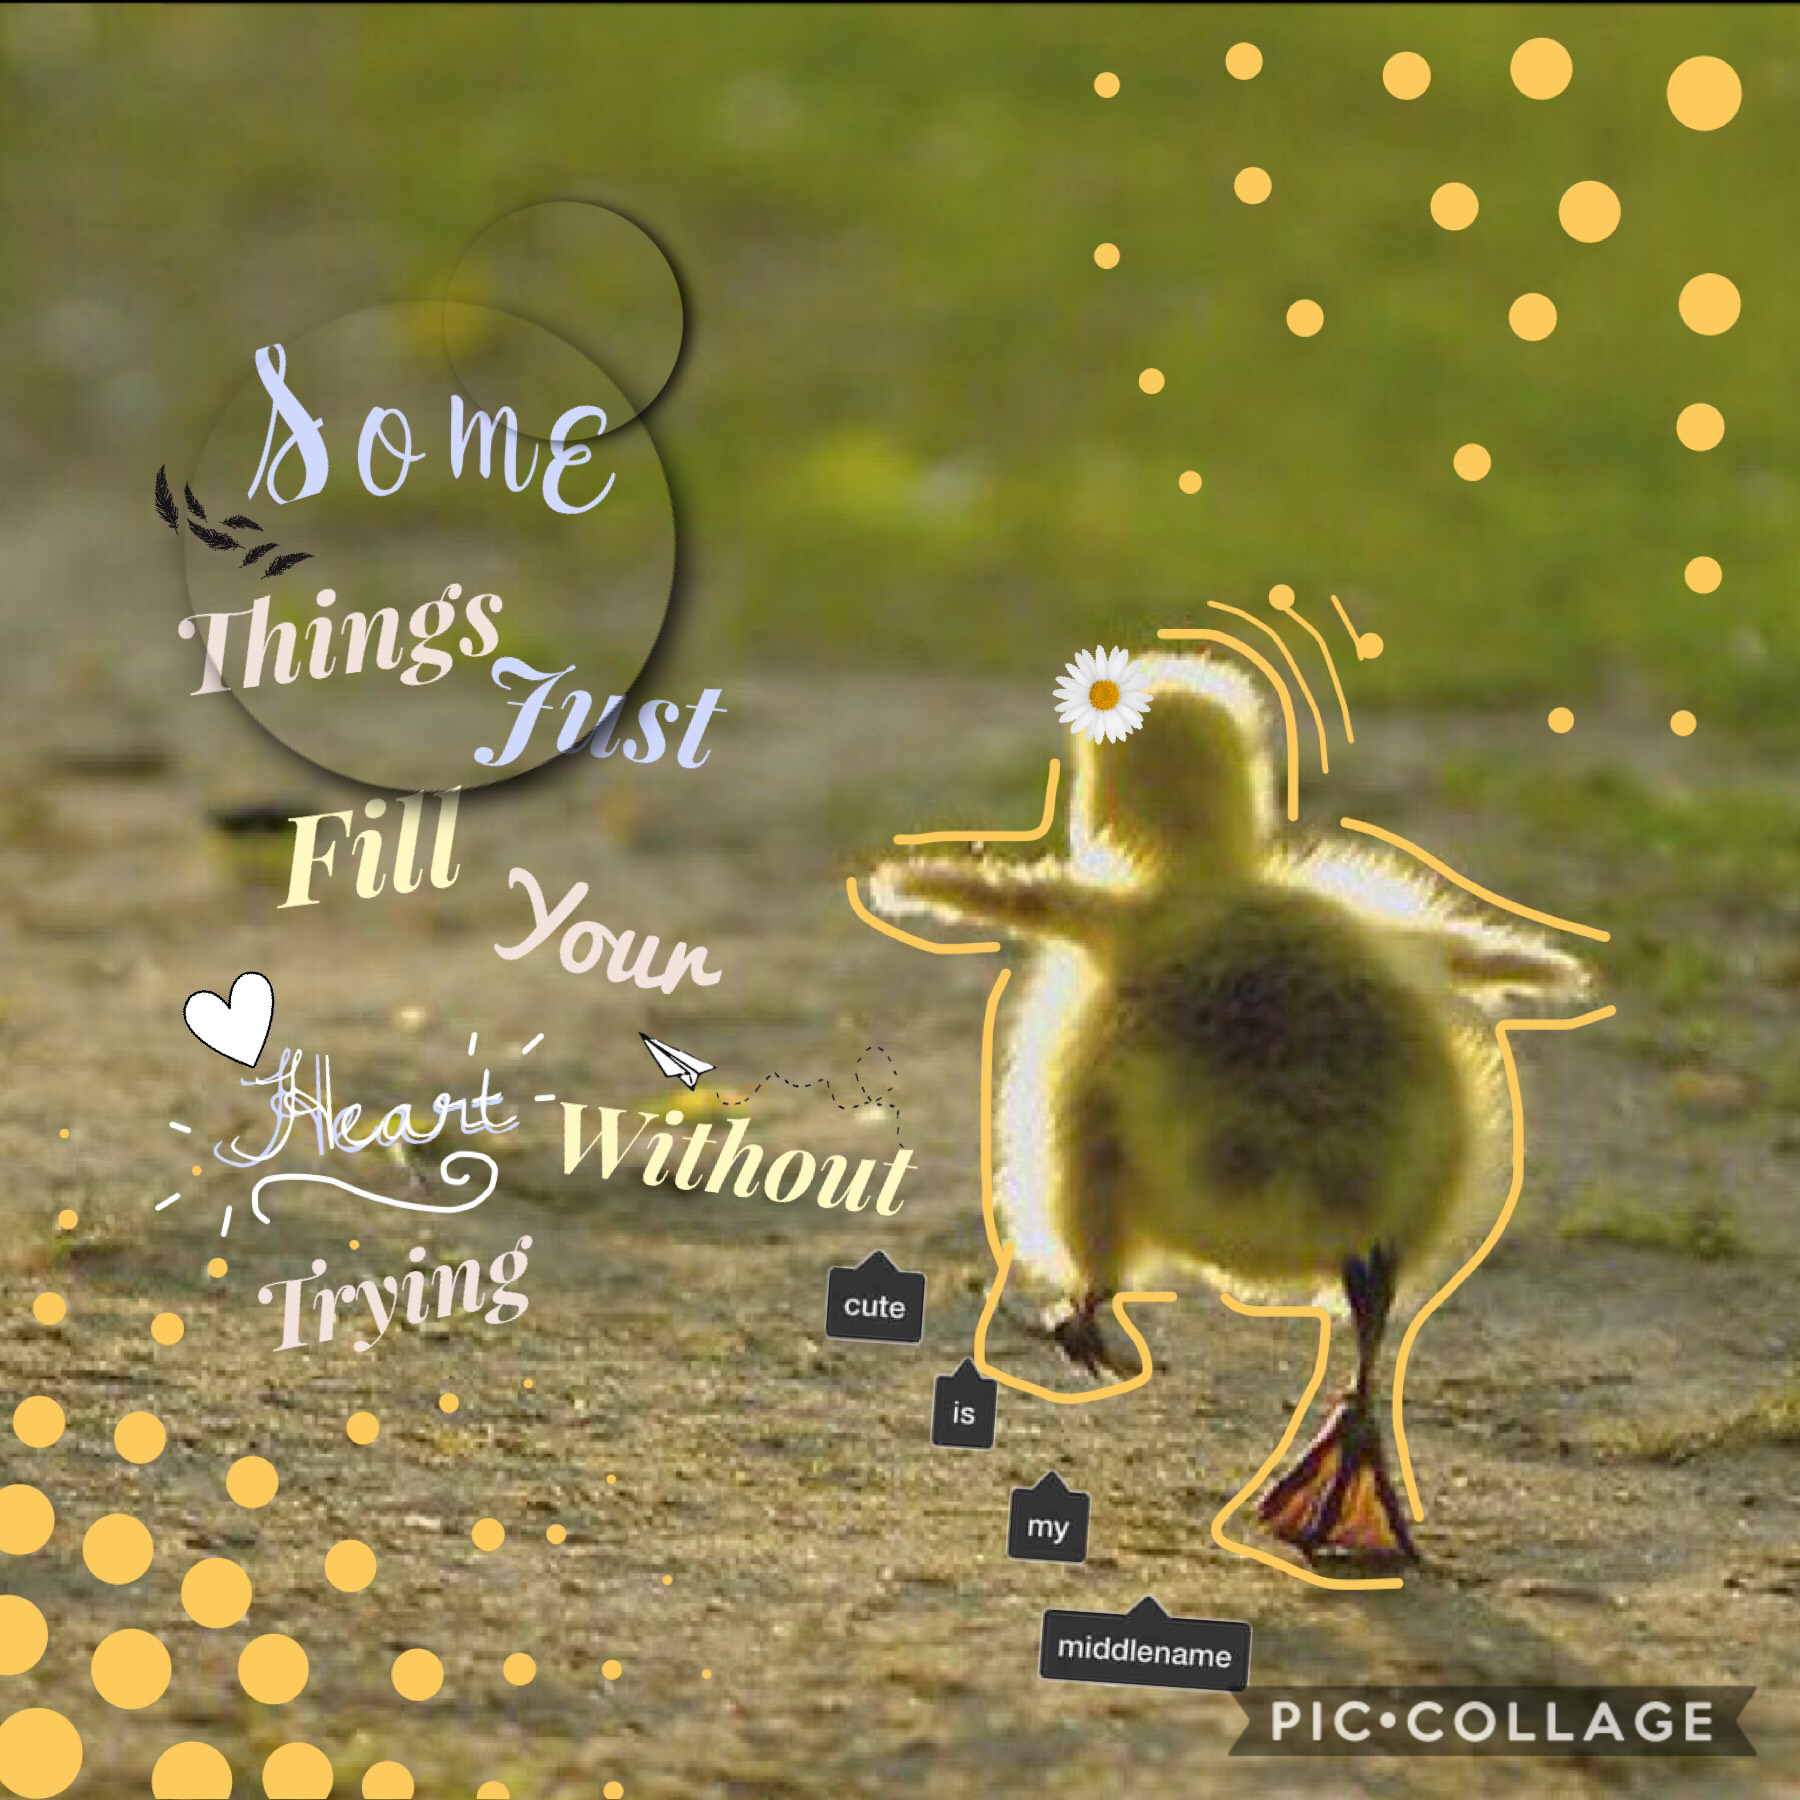 Tap for a cute duck!
🐤
I love this collage! It is so cute!!!! 😍❤️🐤 let’s try to get this one to 45 or more likes! I know we can do it! Also leave a comment! I love to hear your feedback! (Please no copy and paste comments, I hate those!!) 
🐤🐥💛xoxo